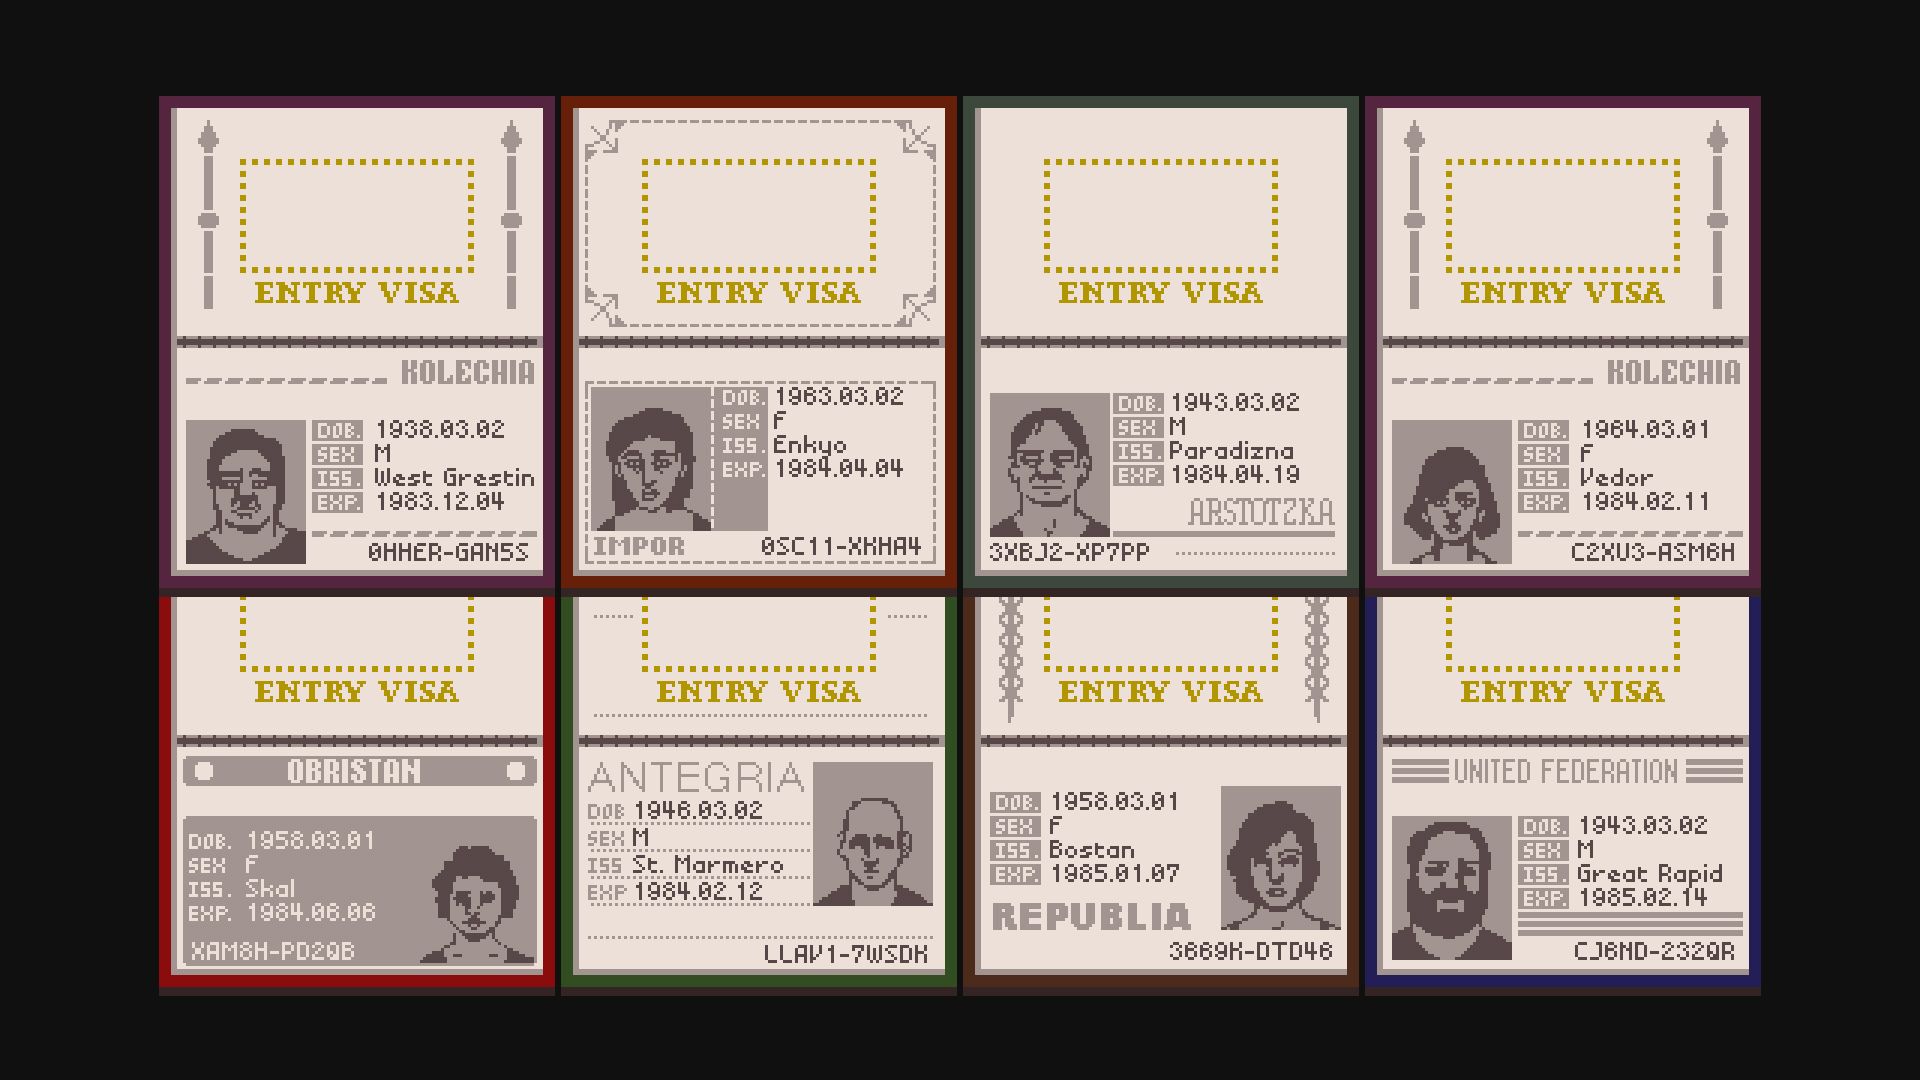 Ezic (Papers Please) HD Wallpapers and Backgrounds